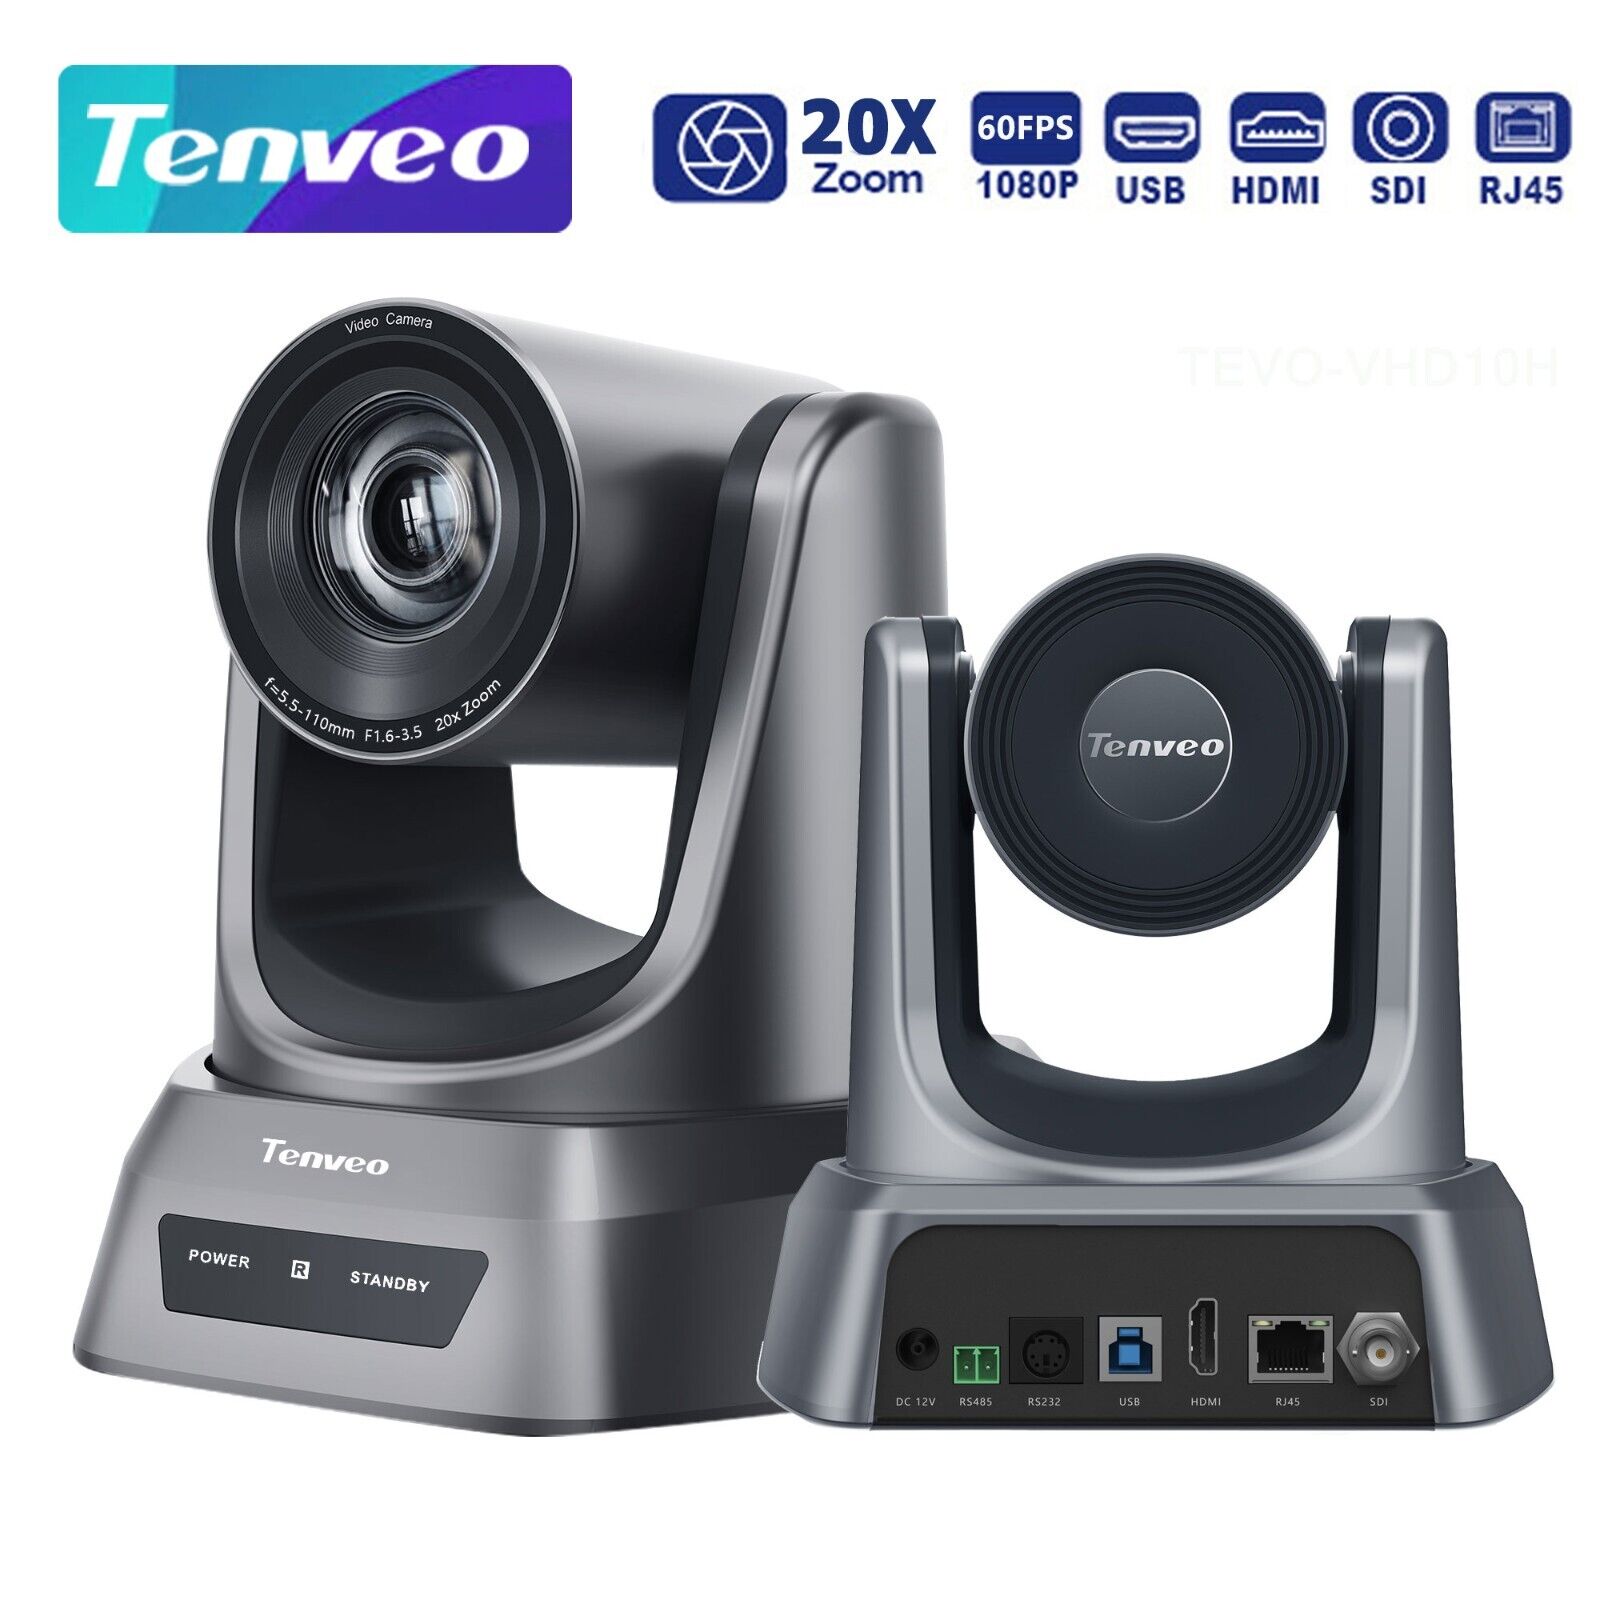 Tenveo 20X Zoom HD1080P 60FPS Conference Camera with 3G-SDI/HDMI/USB3.0/LAN PoE